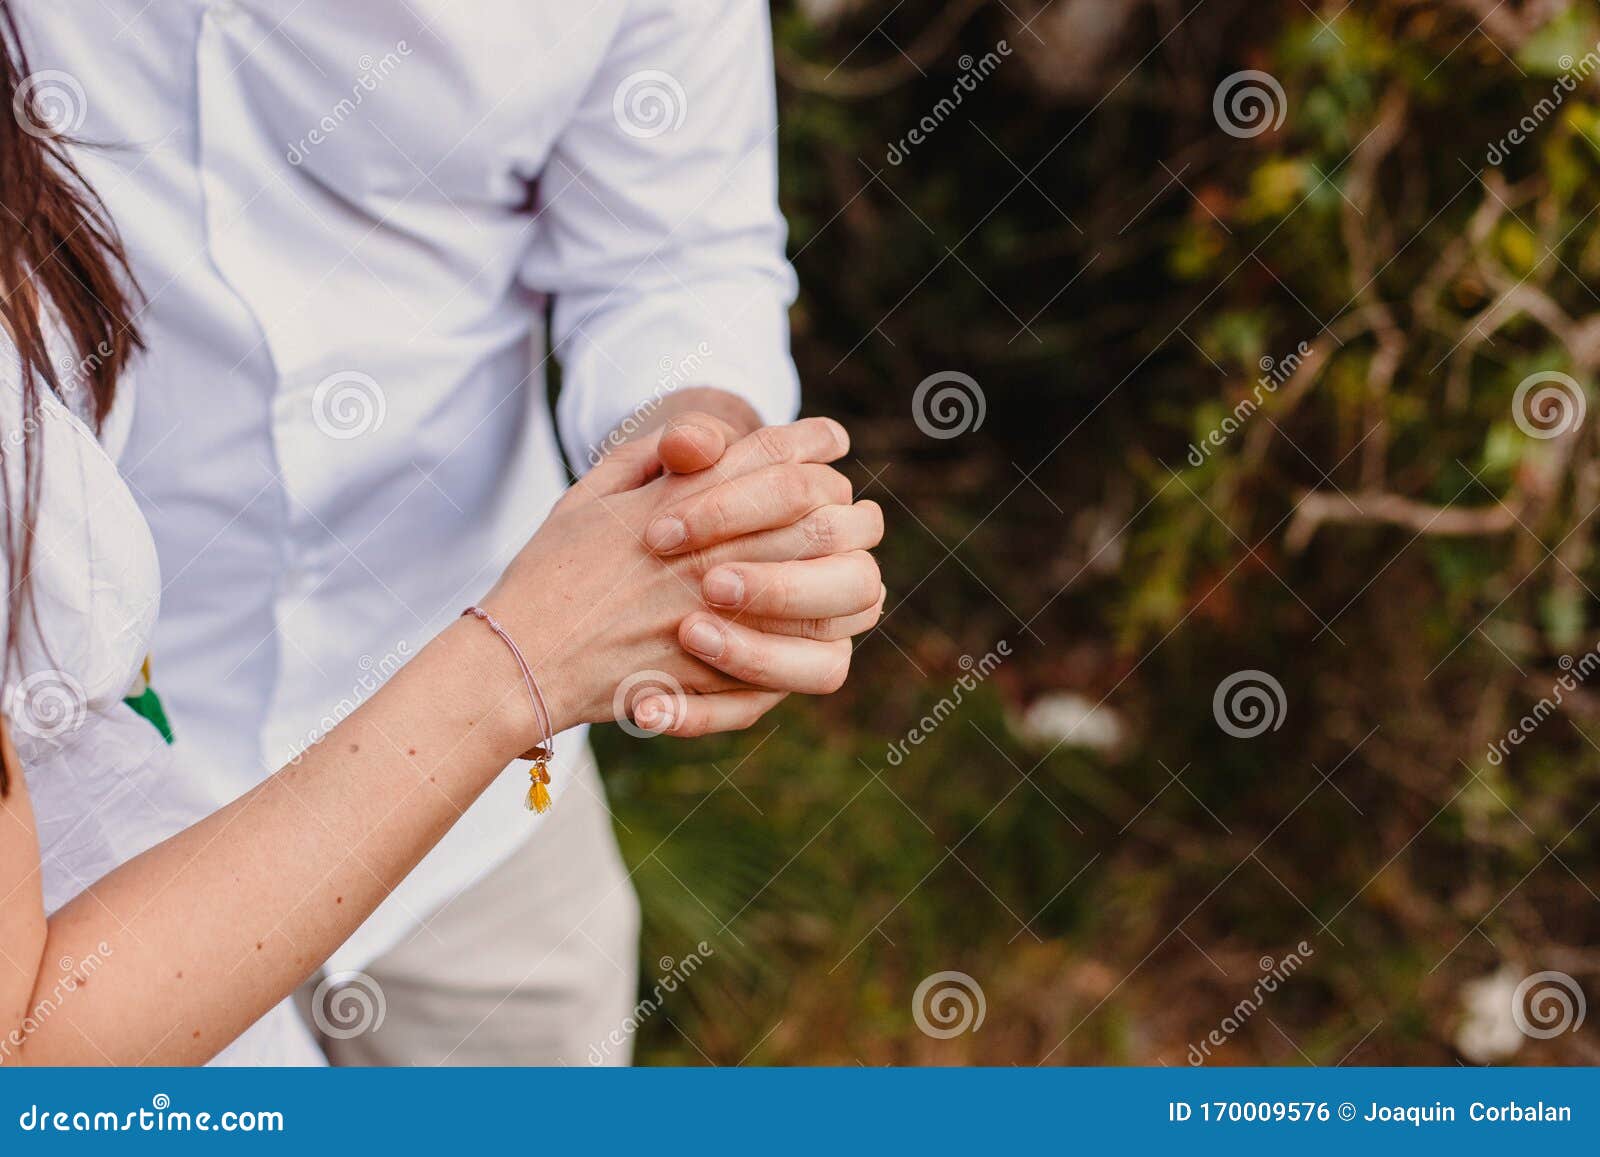 Couple Hugging in Love with a Natural Look Stock Photo - Image of ...